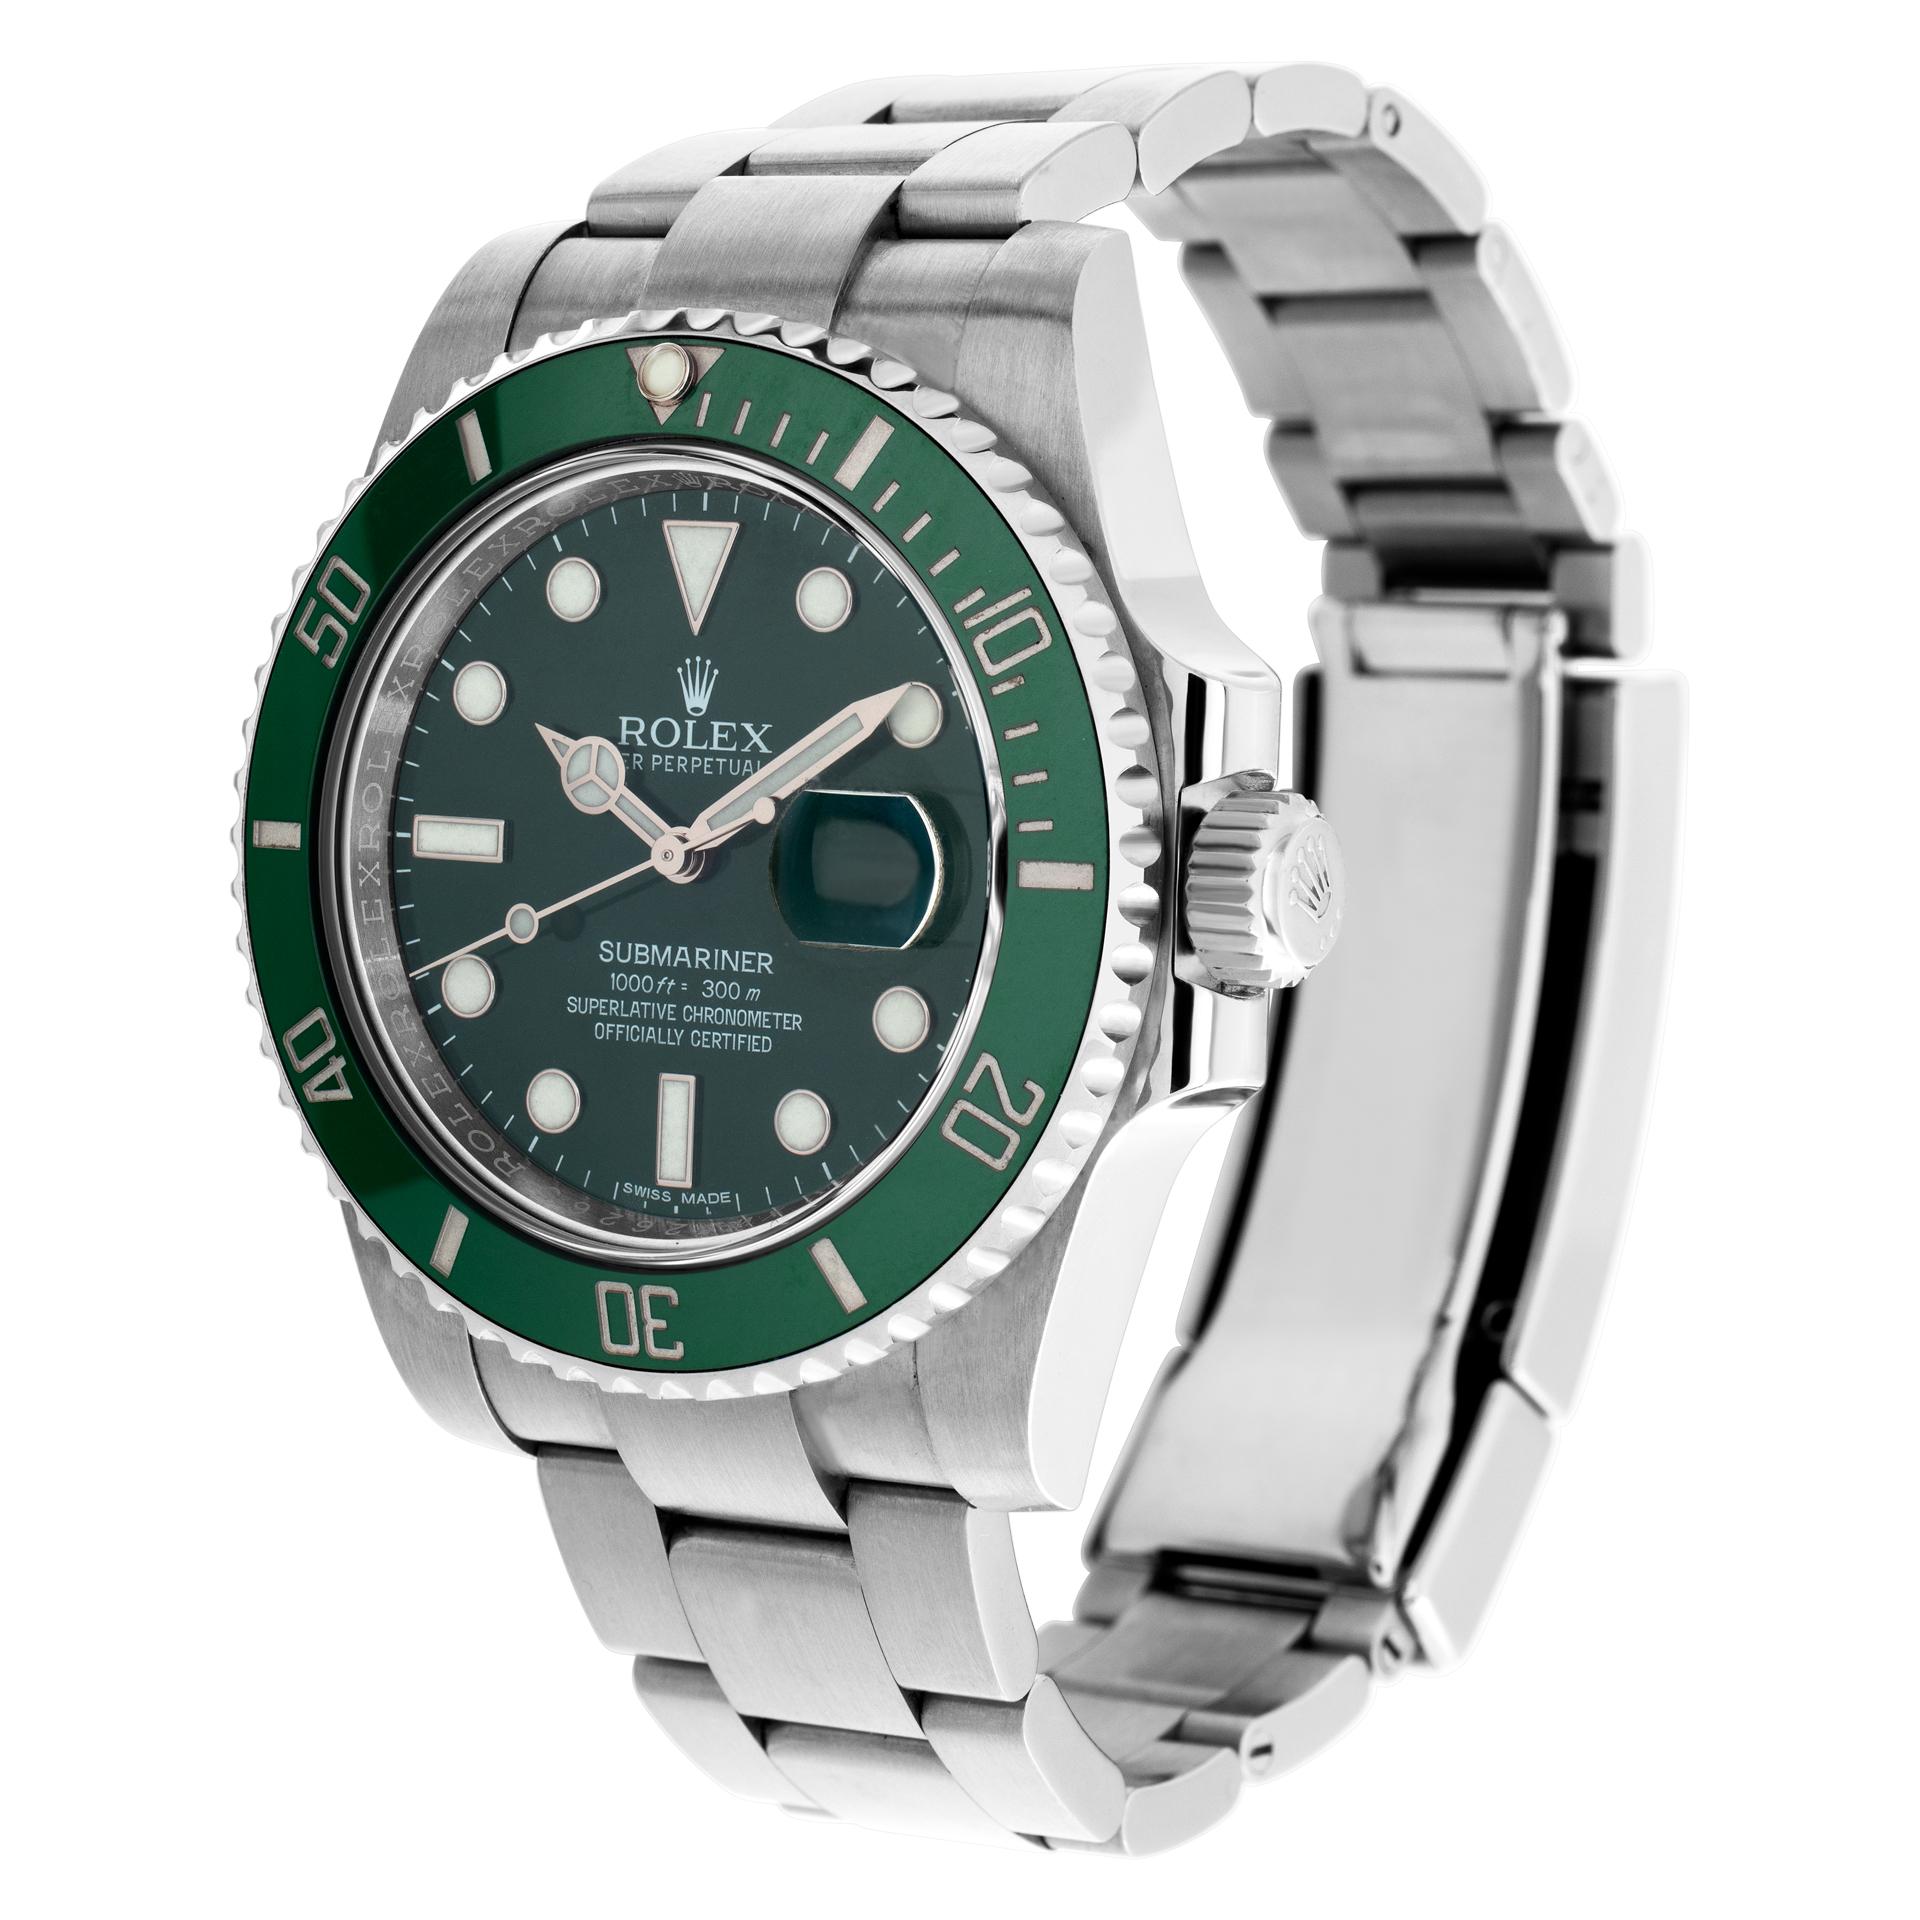 Rolex Submariner 'Hulk' in stainless steel. Auto w/ sweep seconds and date. 40 mm case size. Ref 116610LV. Circa 2010s. **Bank wire only at this price** Fine Pre-owned Rolex Watch. Certified preowned Sport Rolex Submariner 116610LV watch is made out